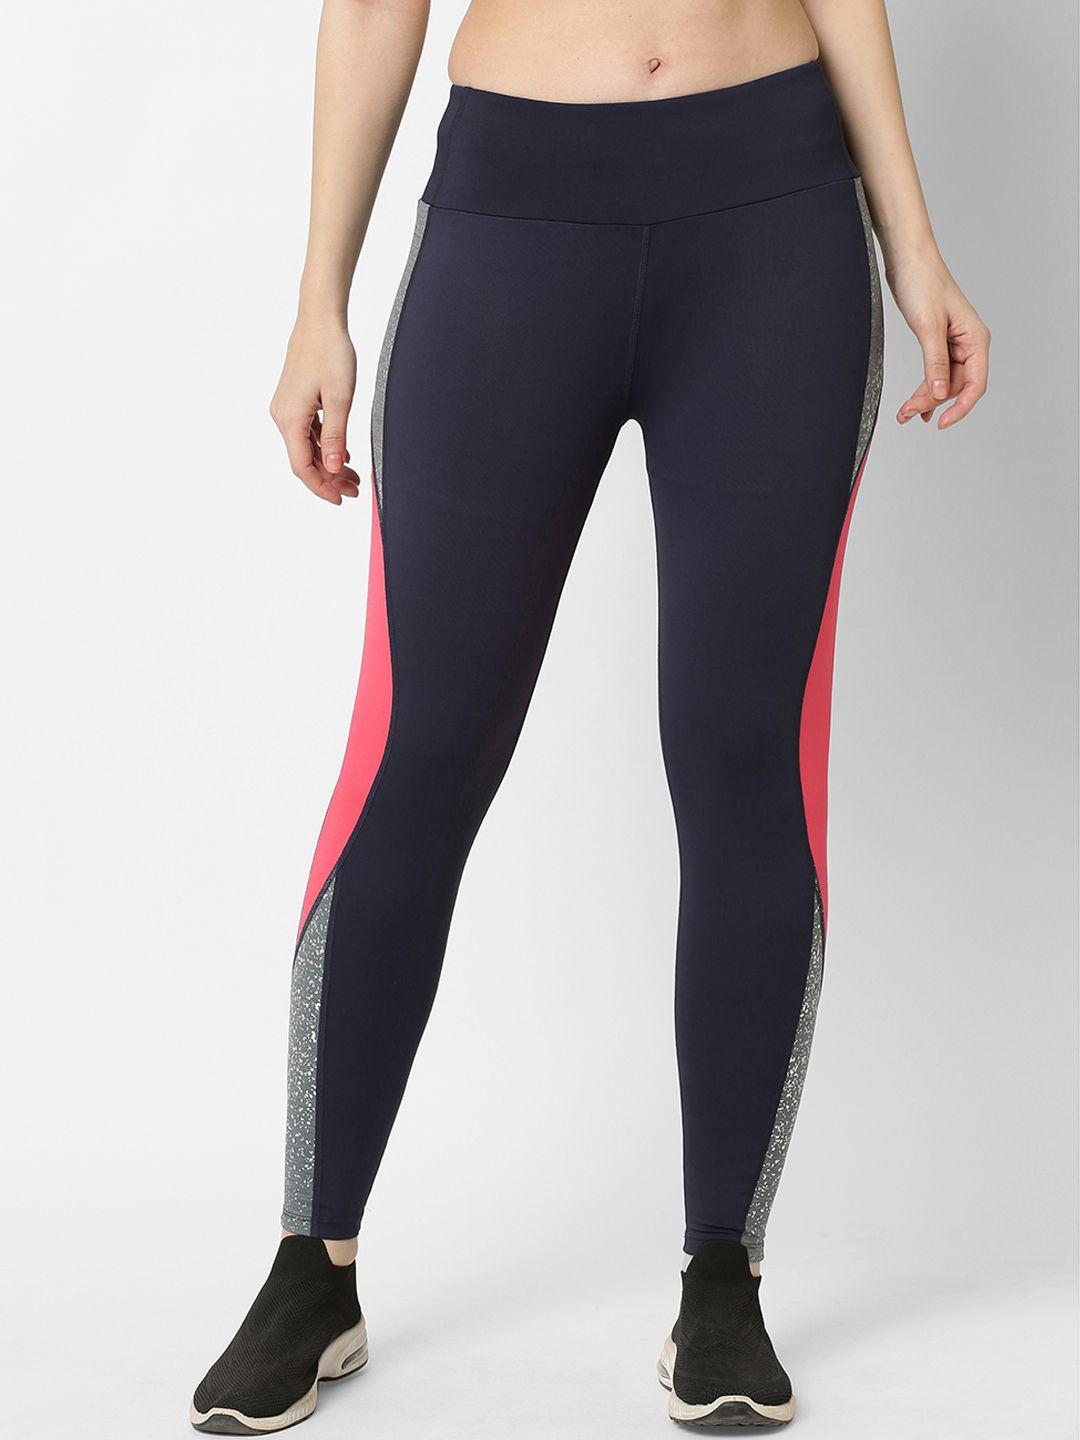 laasa-sports-women-dry-fit-colorblocked-sports-tights